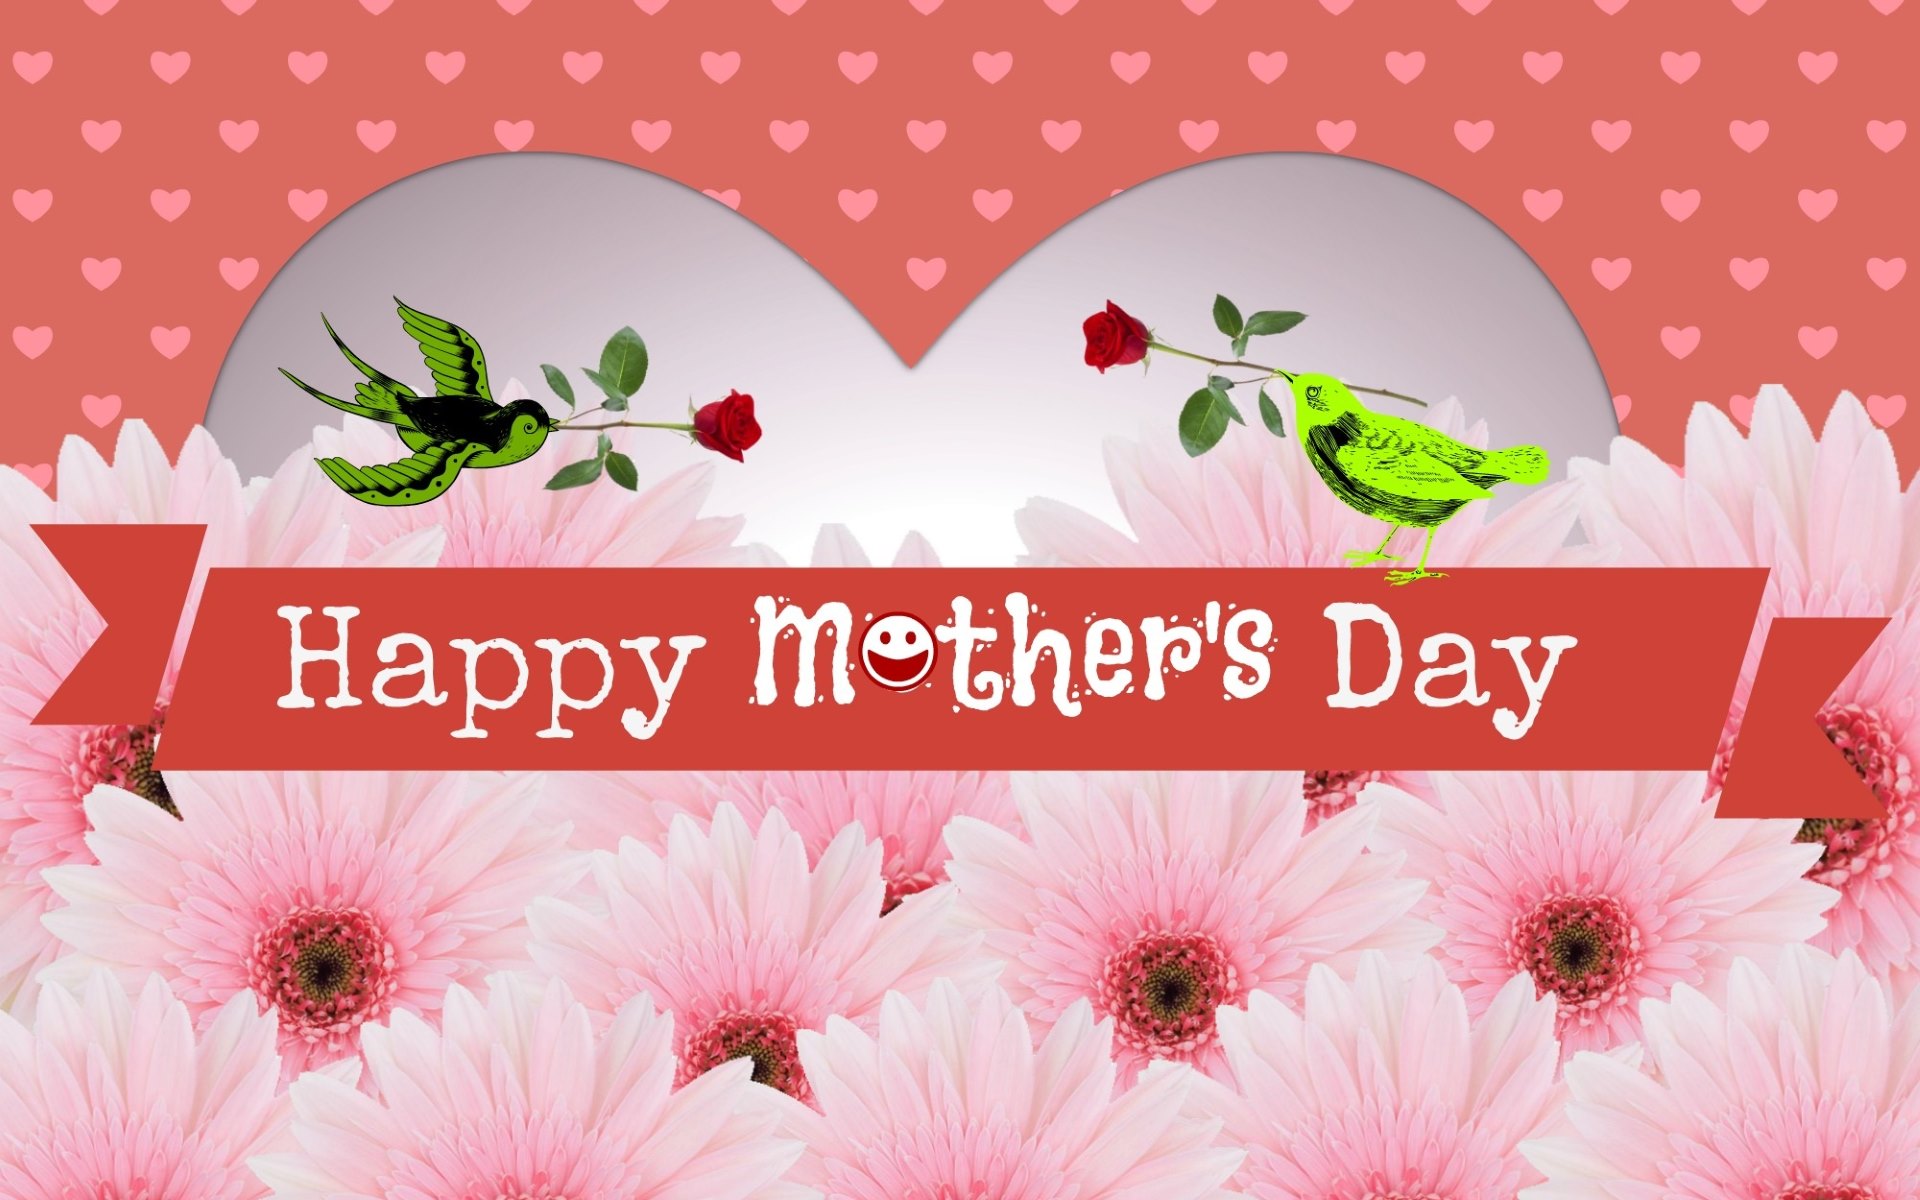 holiday, mother's day, bird, flower, pink flower